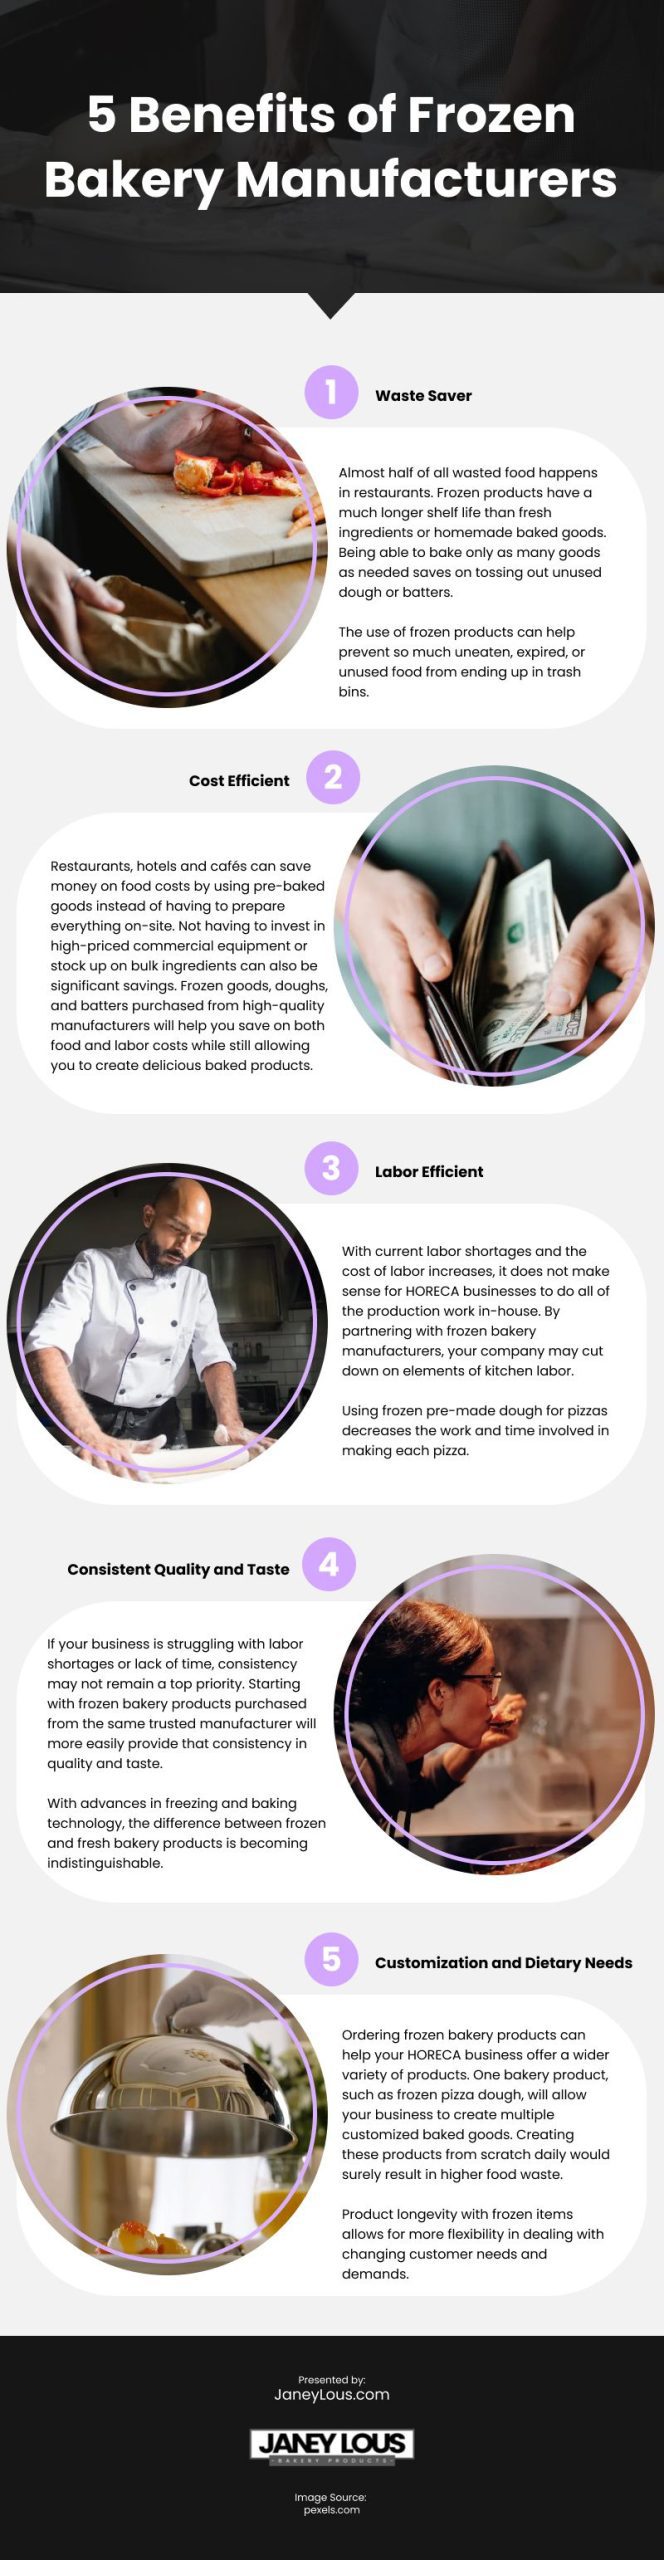 5 Benefits of Frozen Bakery Manufacturers Infographic